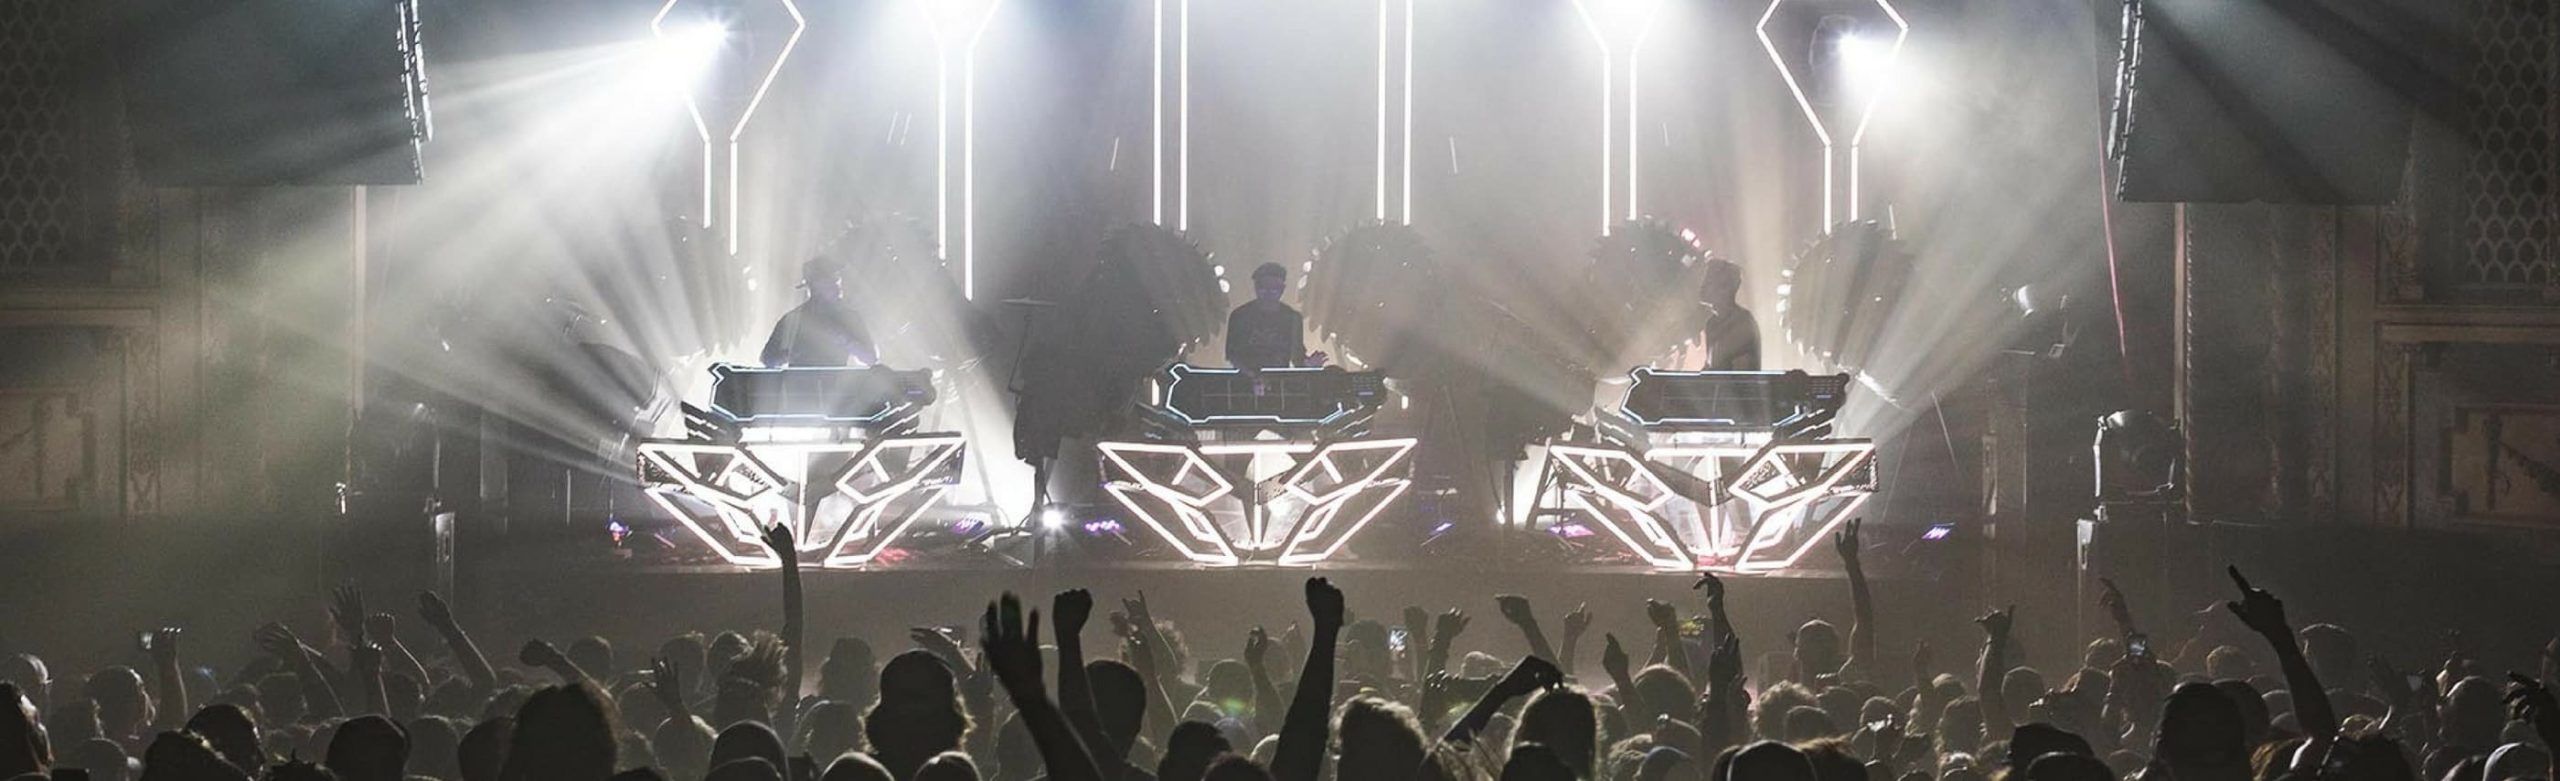 The Glitch Mob Brings Thoughtful Artistry to EDM (Review/Photos) Image